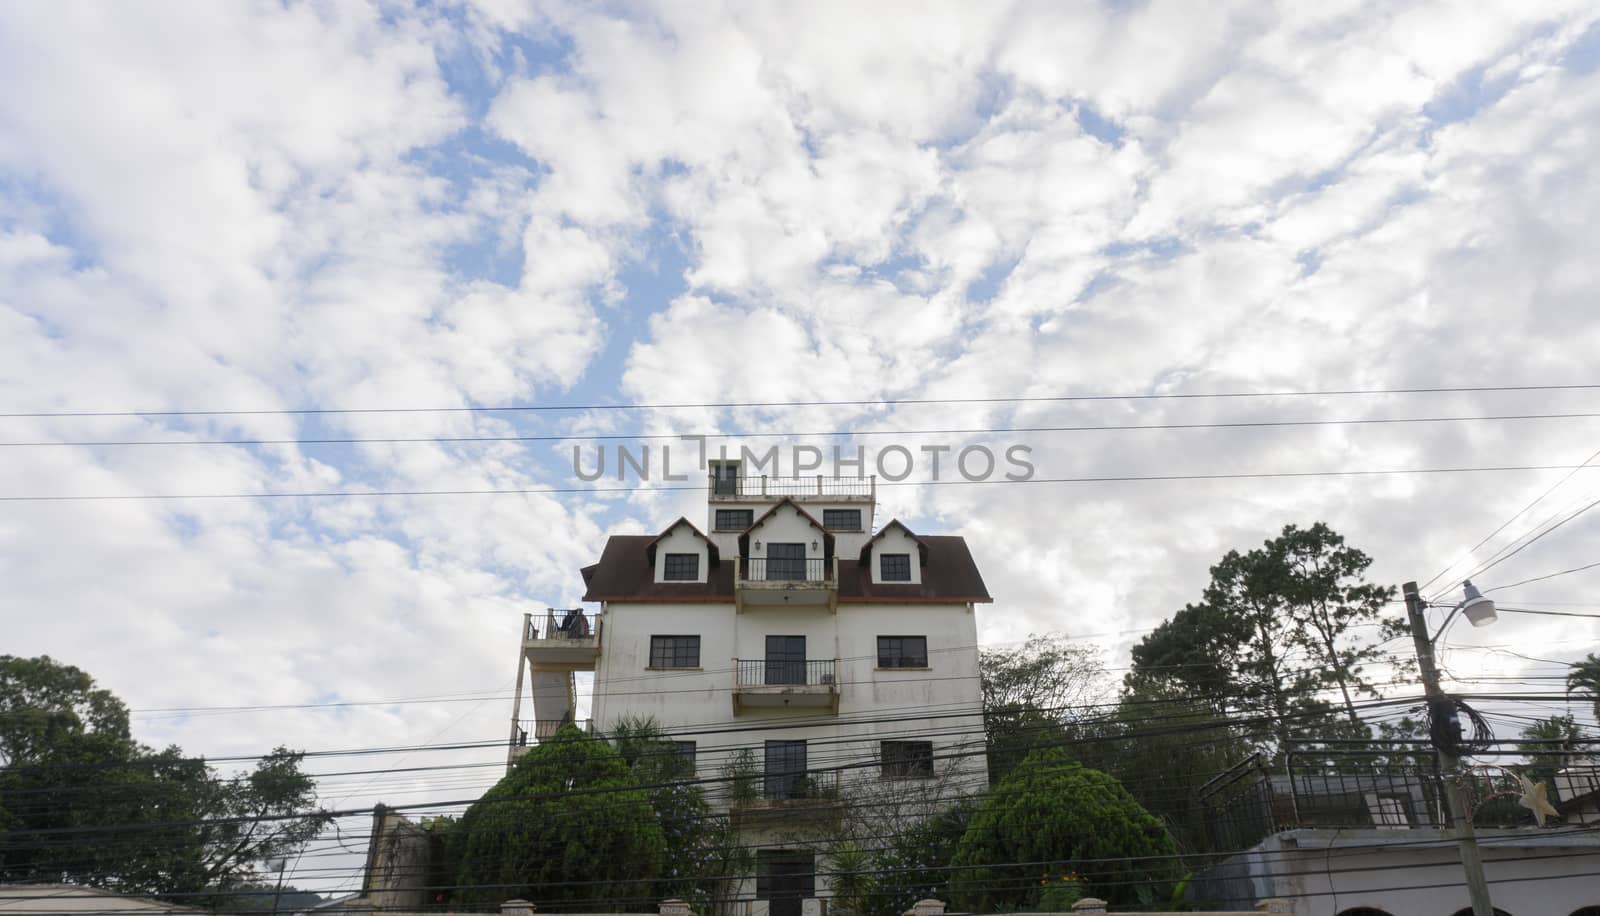 Beautiful house with a lot of clouds and blue sky by henrry08